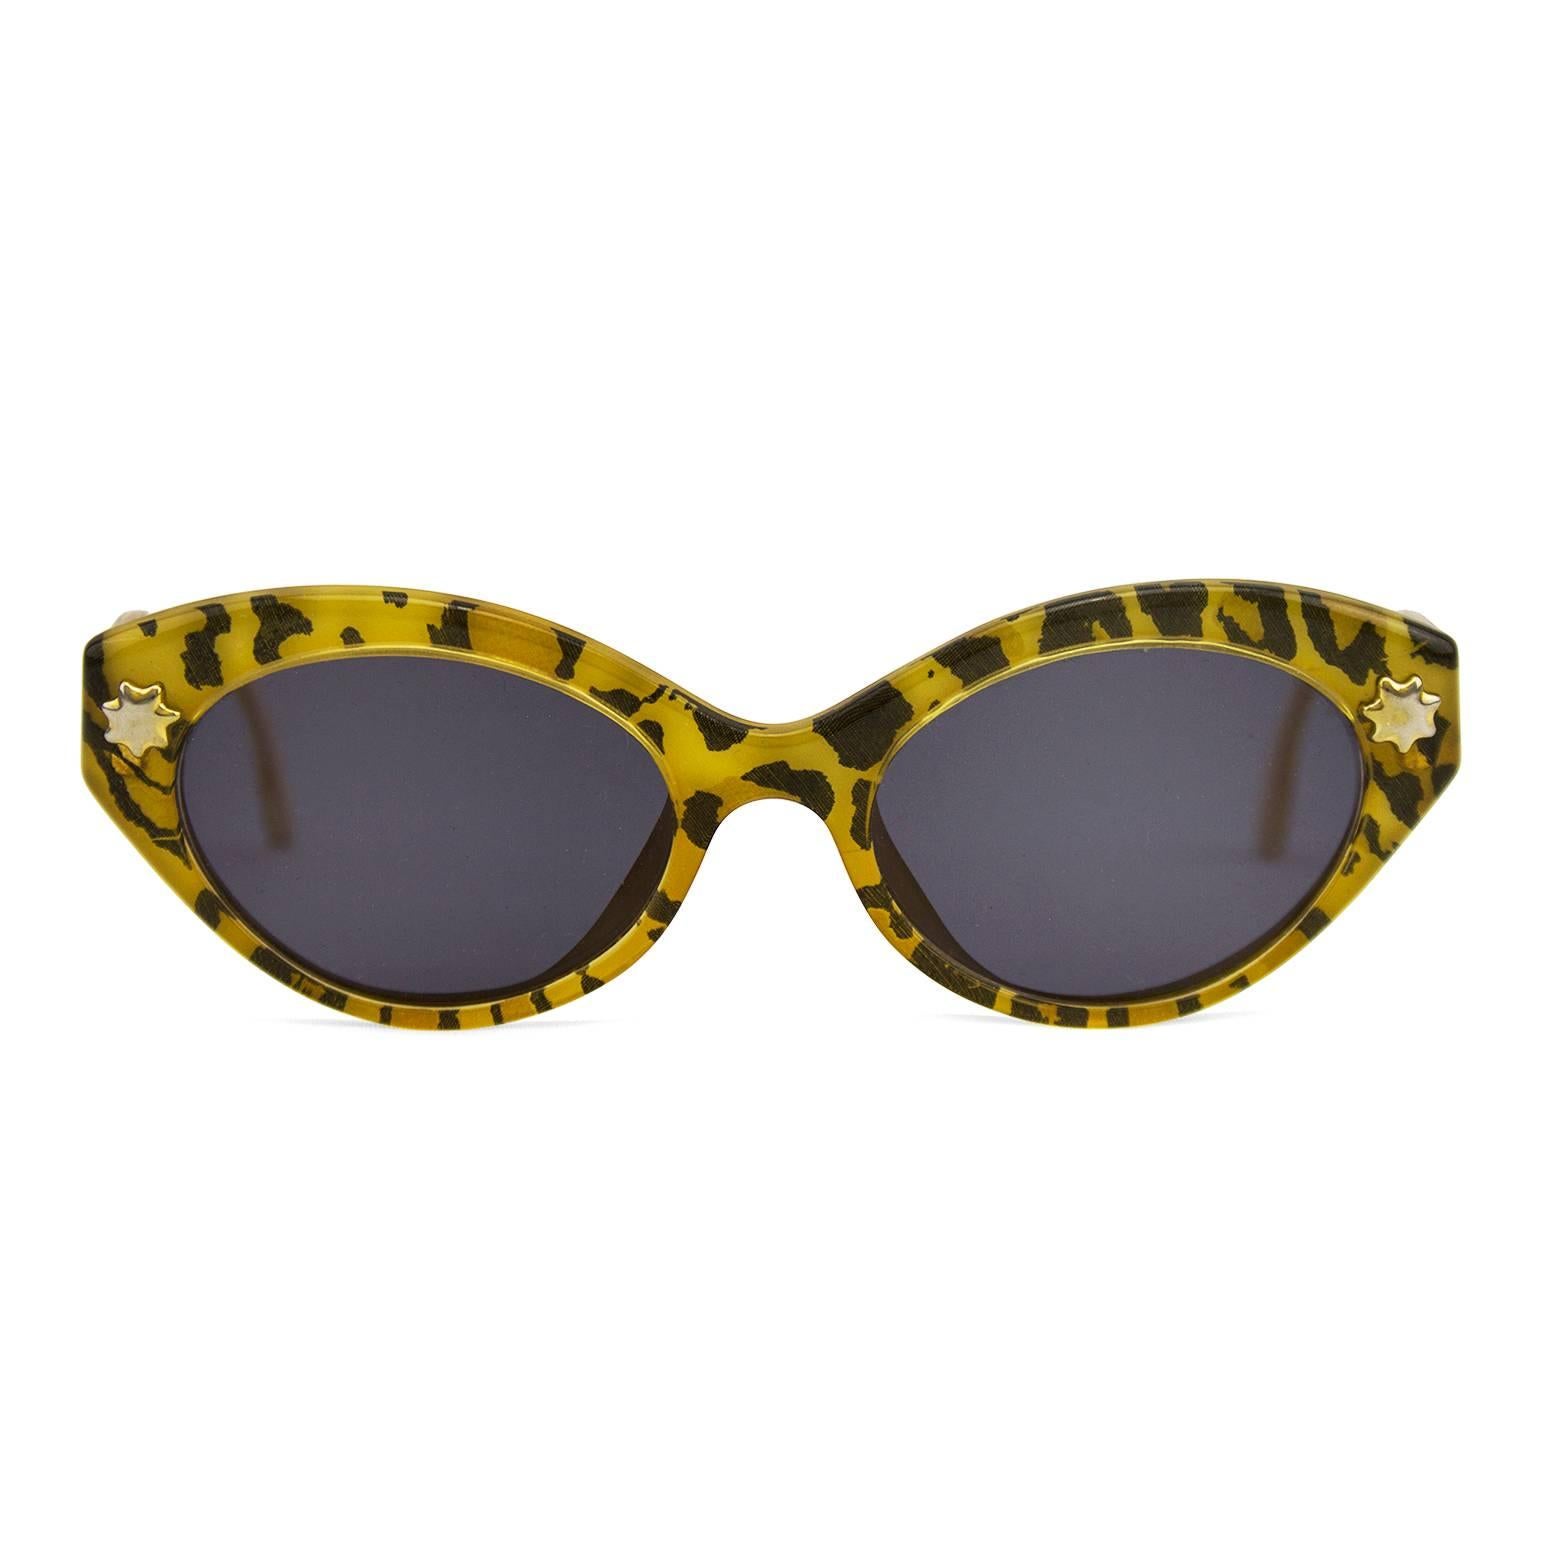 1980s Christian Lacroix cat eye shaped leopard print sunglasses. Small gold star and logo details. Cream interior with black brand stamp. Brand new black/grey lenses. Excellent vintage condition. No case. 